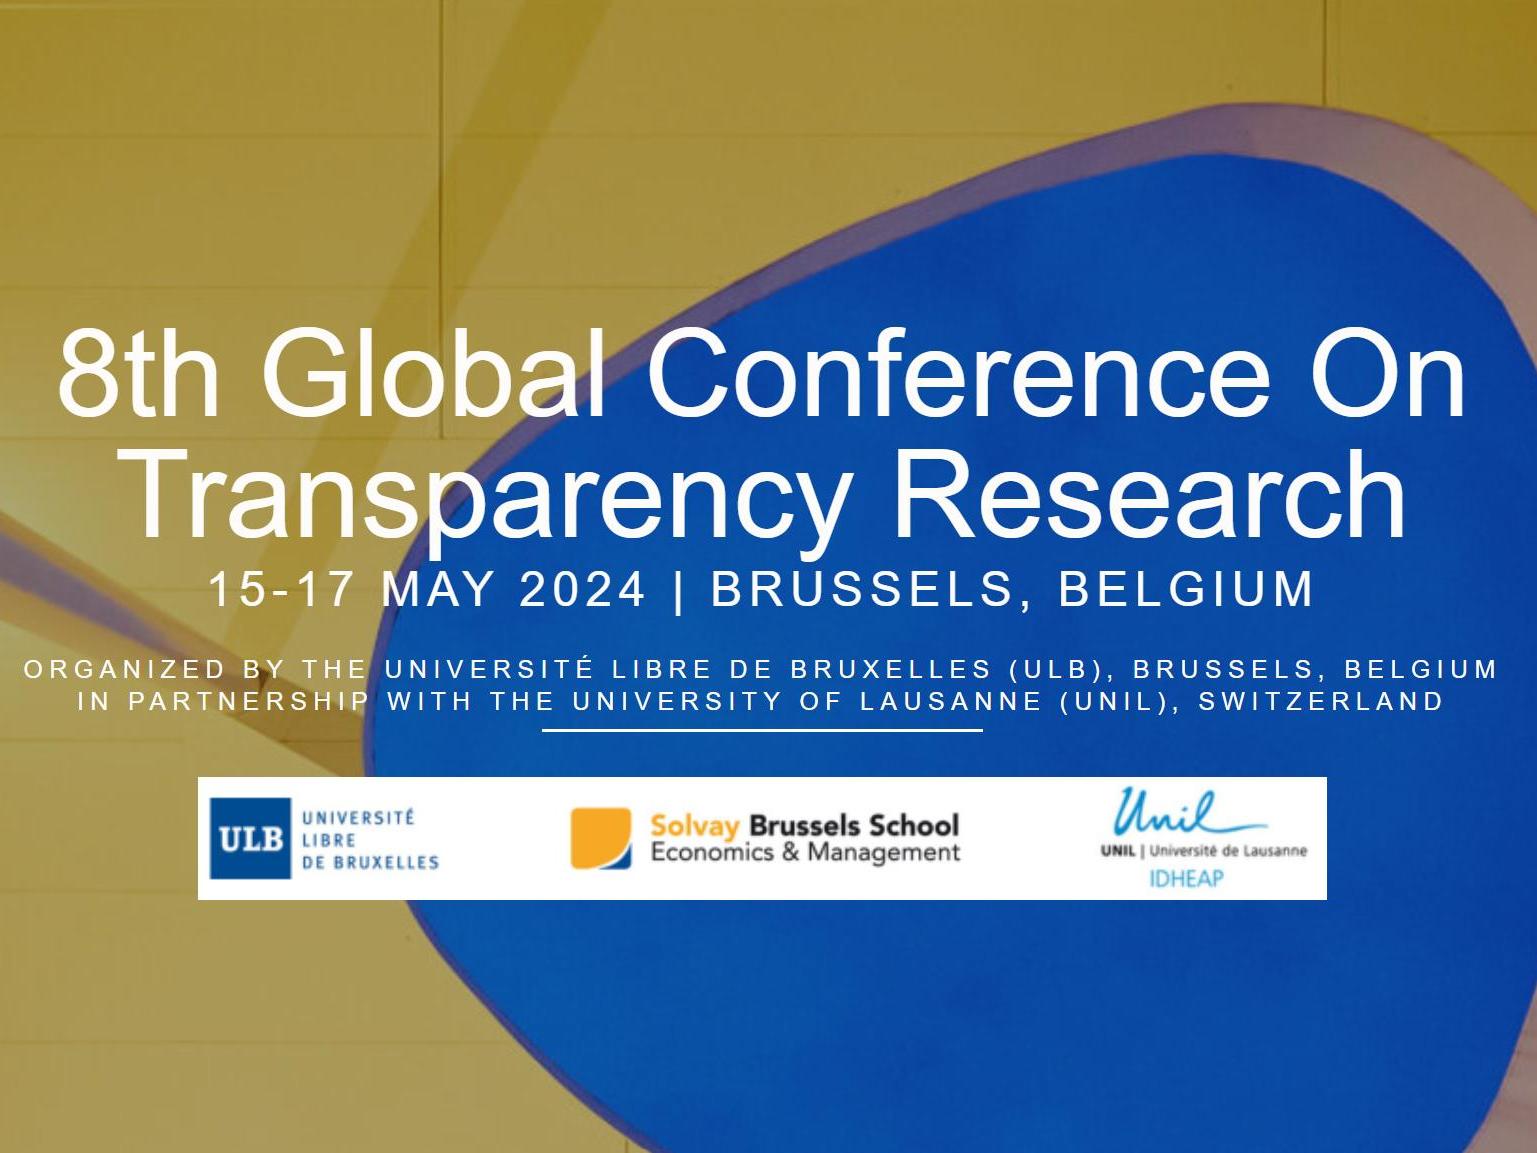  8th Global Conference on Transparency Research (GCTR)